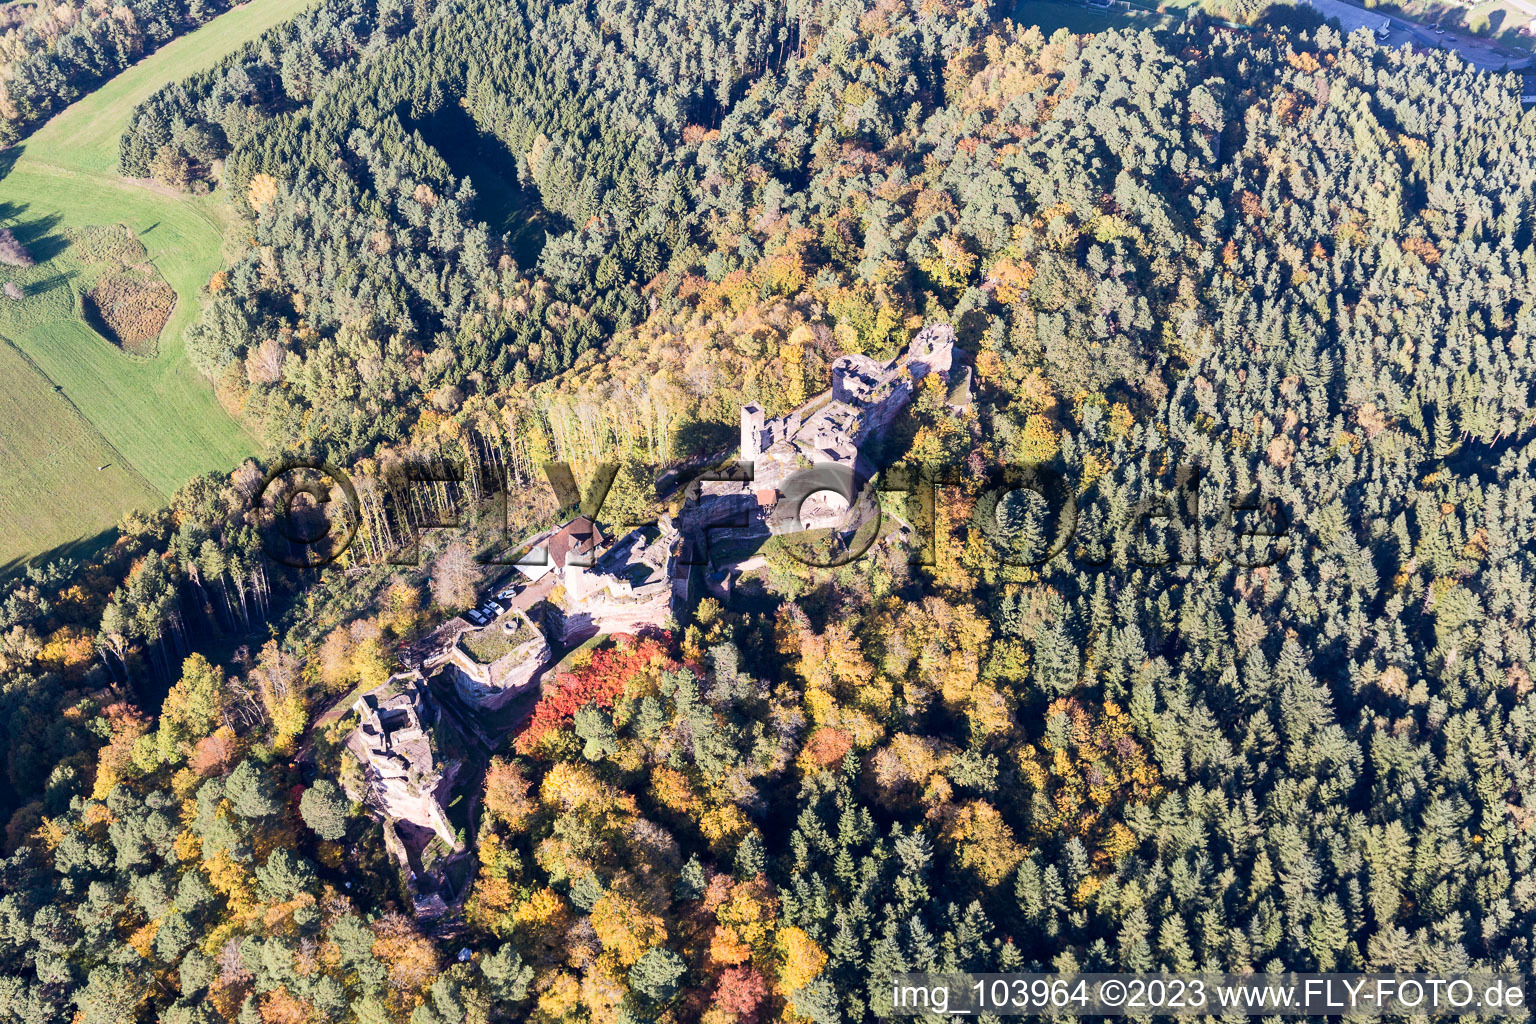 Altdahn and Neudahn castles in Dahn in the state Rhineland-Palatinate, Germany from above